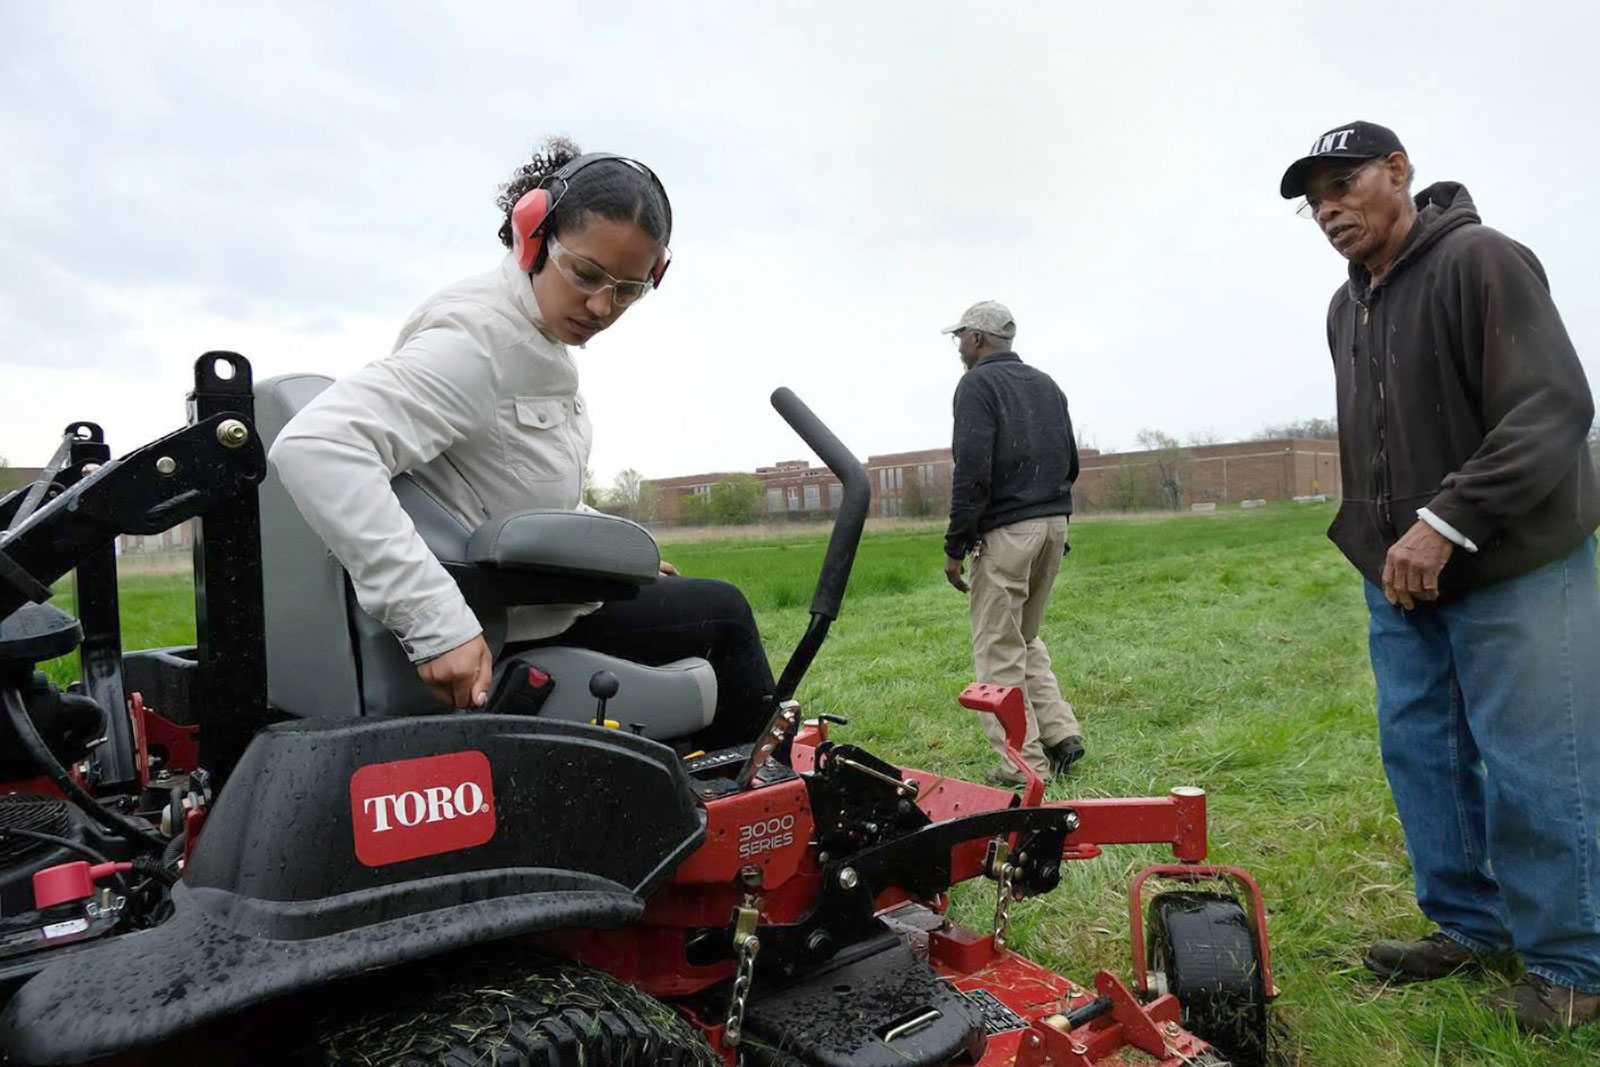 A young woman is seated on a lawnmower. Two men stand nearby.